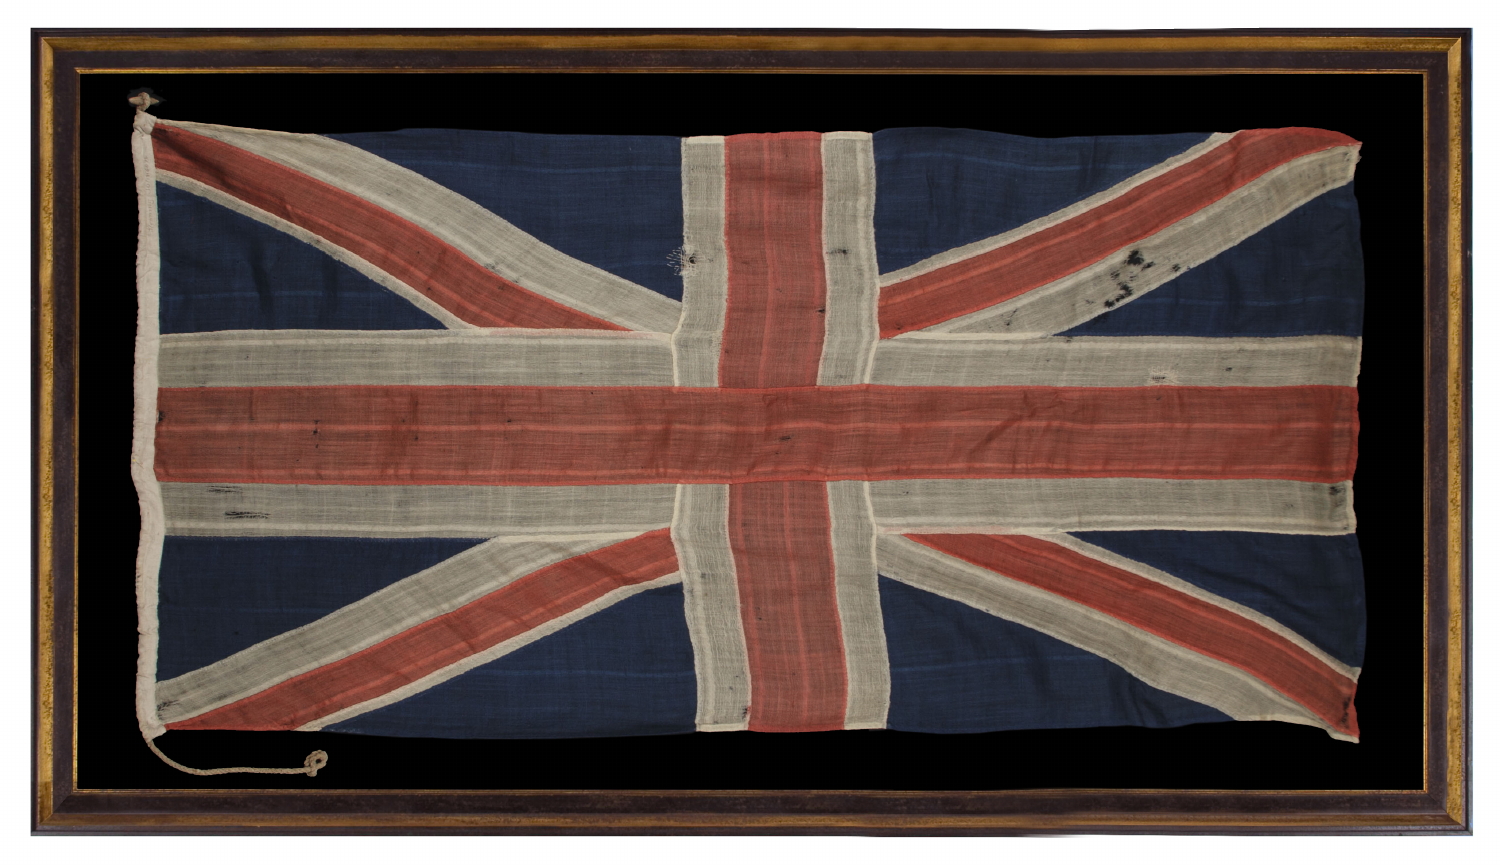 ONE OF THE THREE EARLIEST BRITISH UNION JACKS THAT I HAVE ENCOUNTERED IN PRIVATE HANDS, 1801-1835